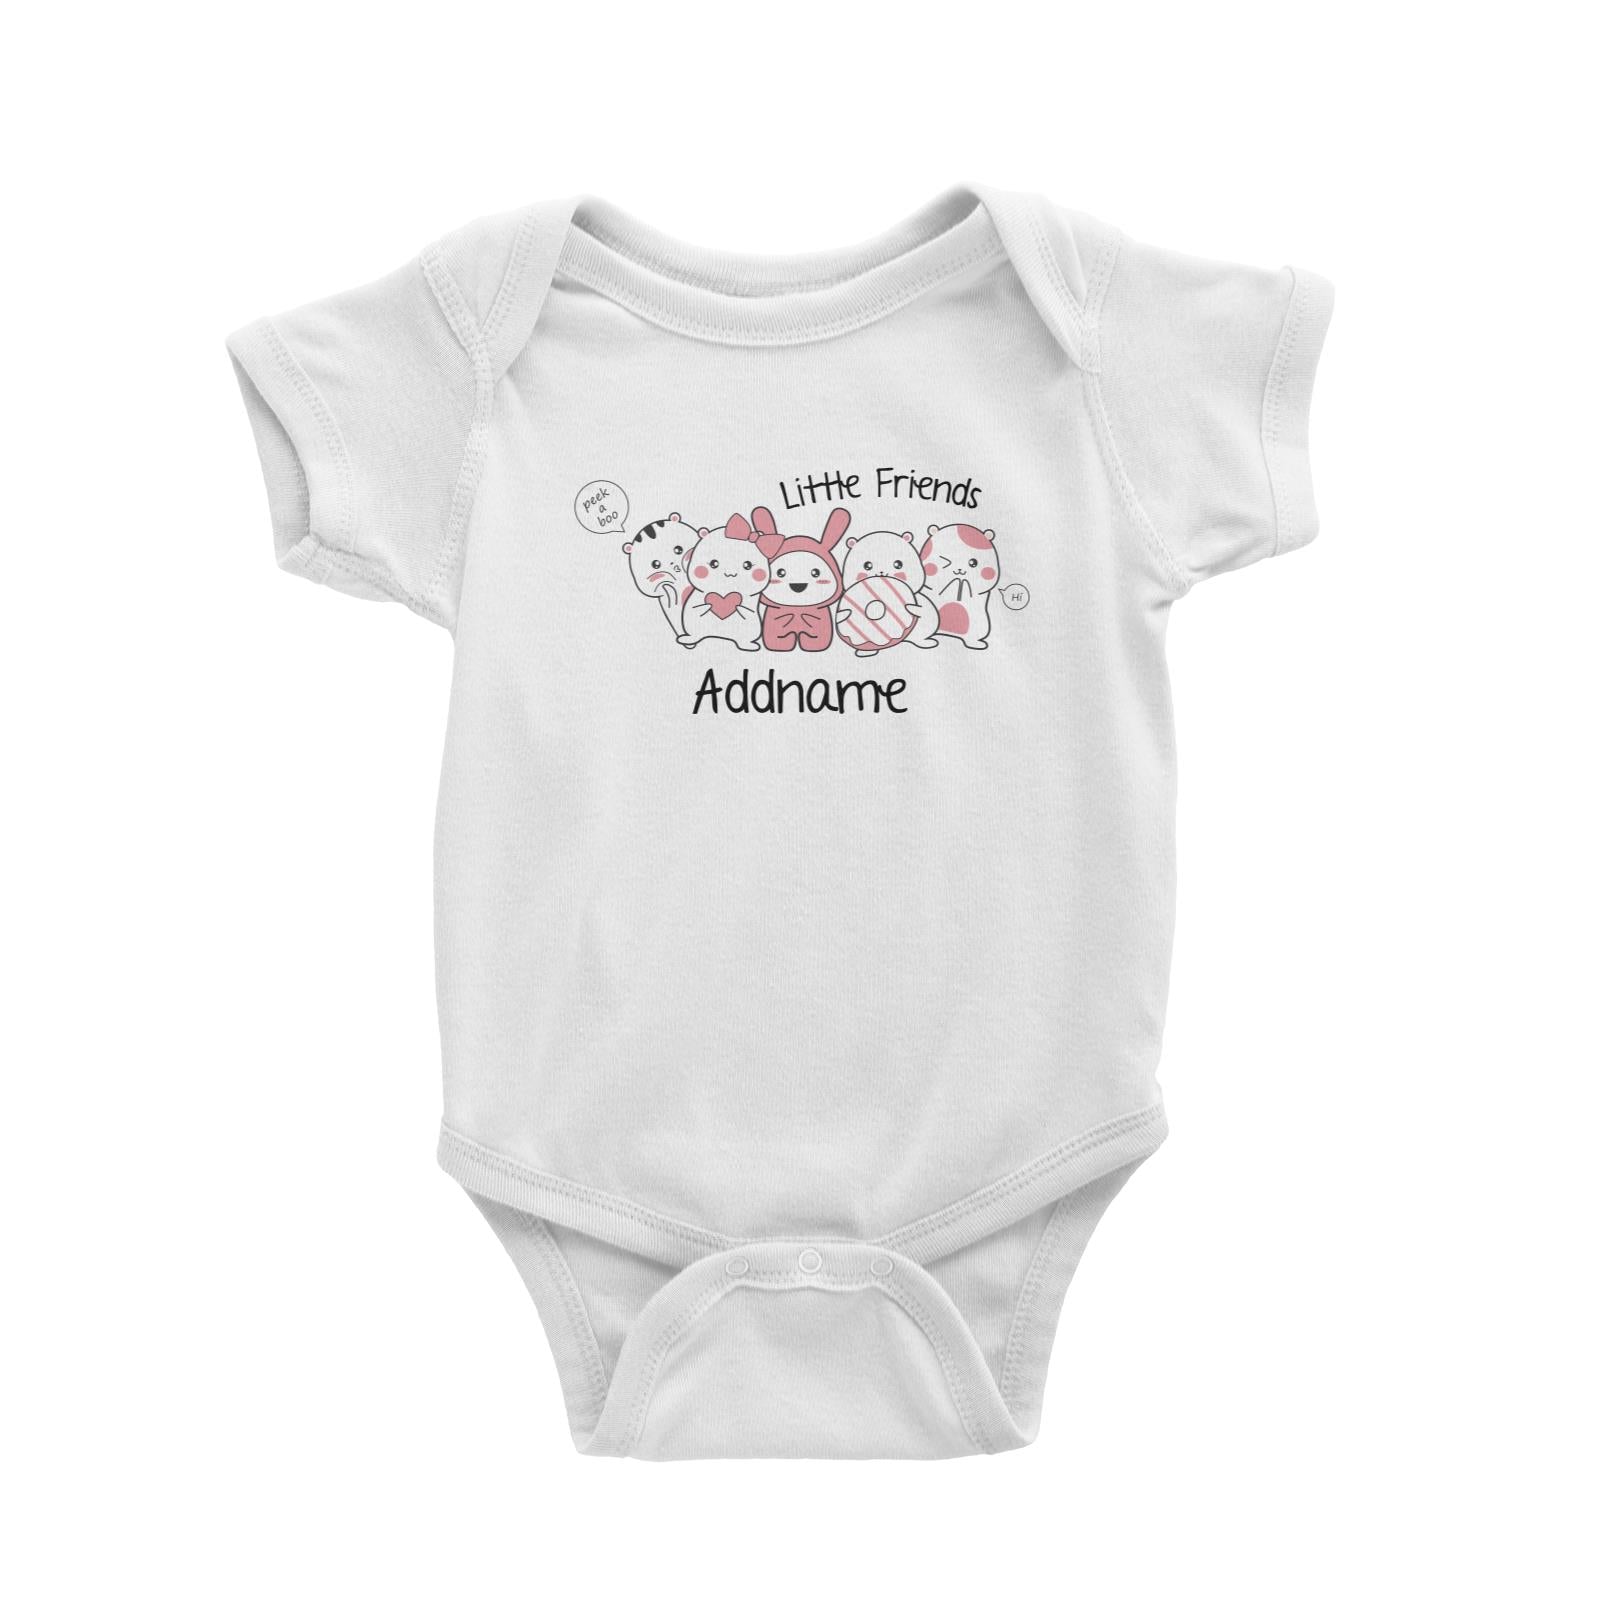 Cute Animals And Friends Series Cute Hamster Little Friends Addname Baby Romper